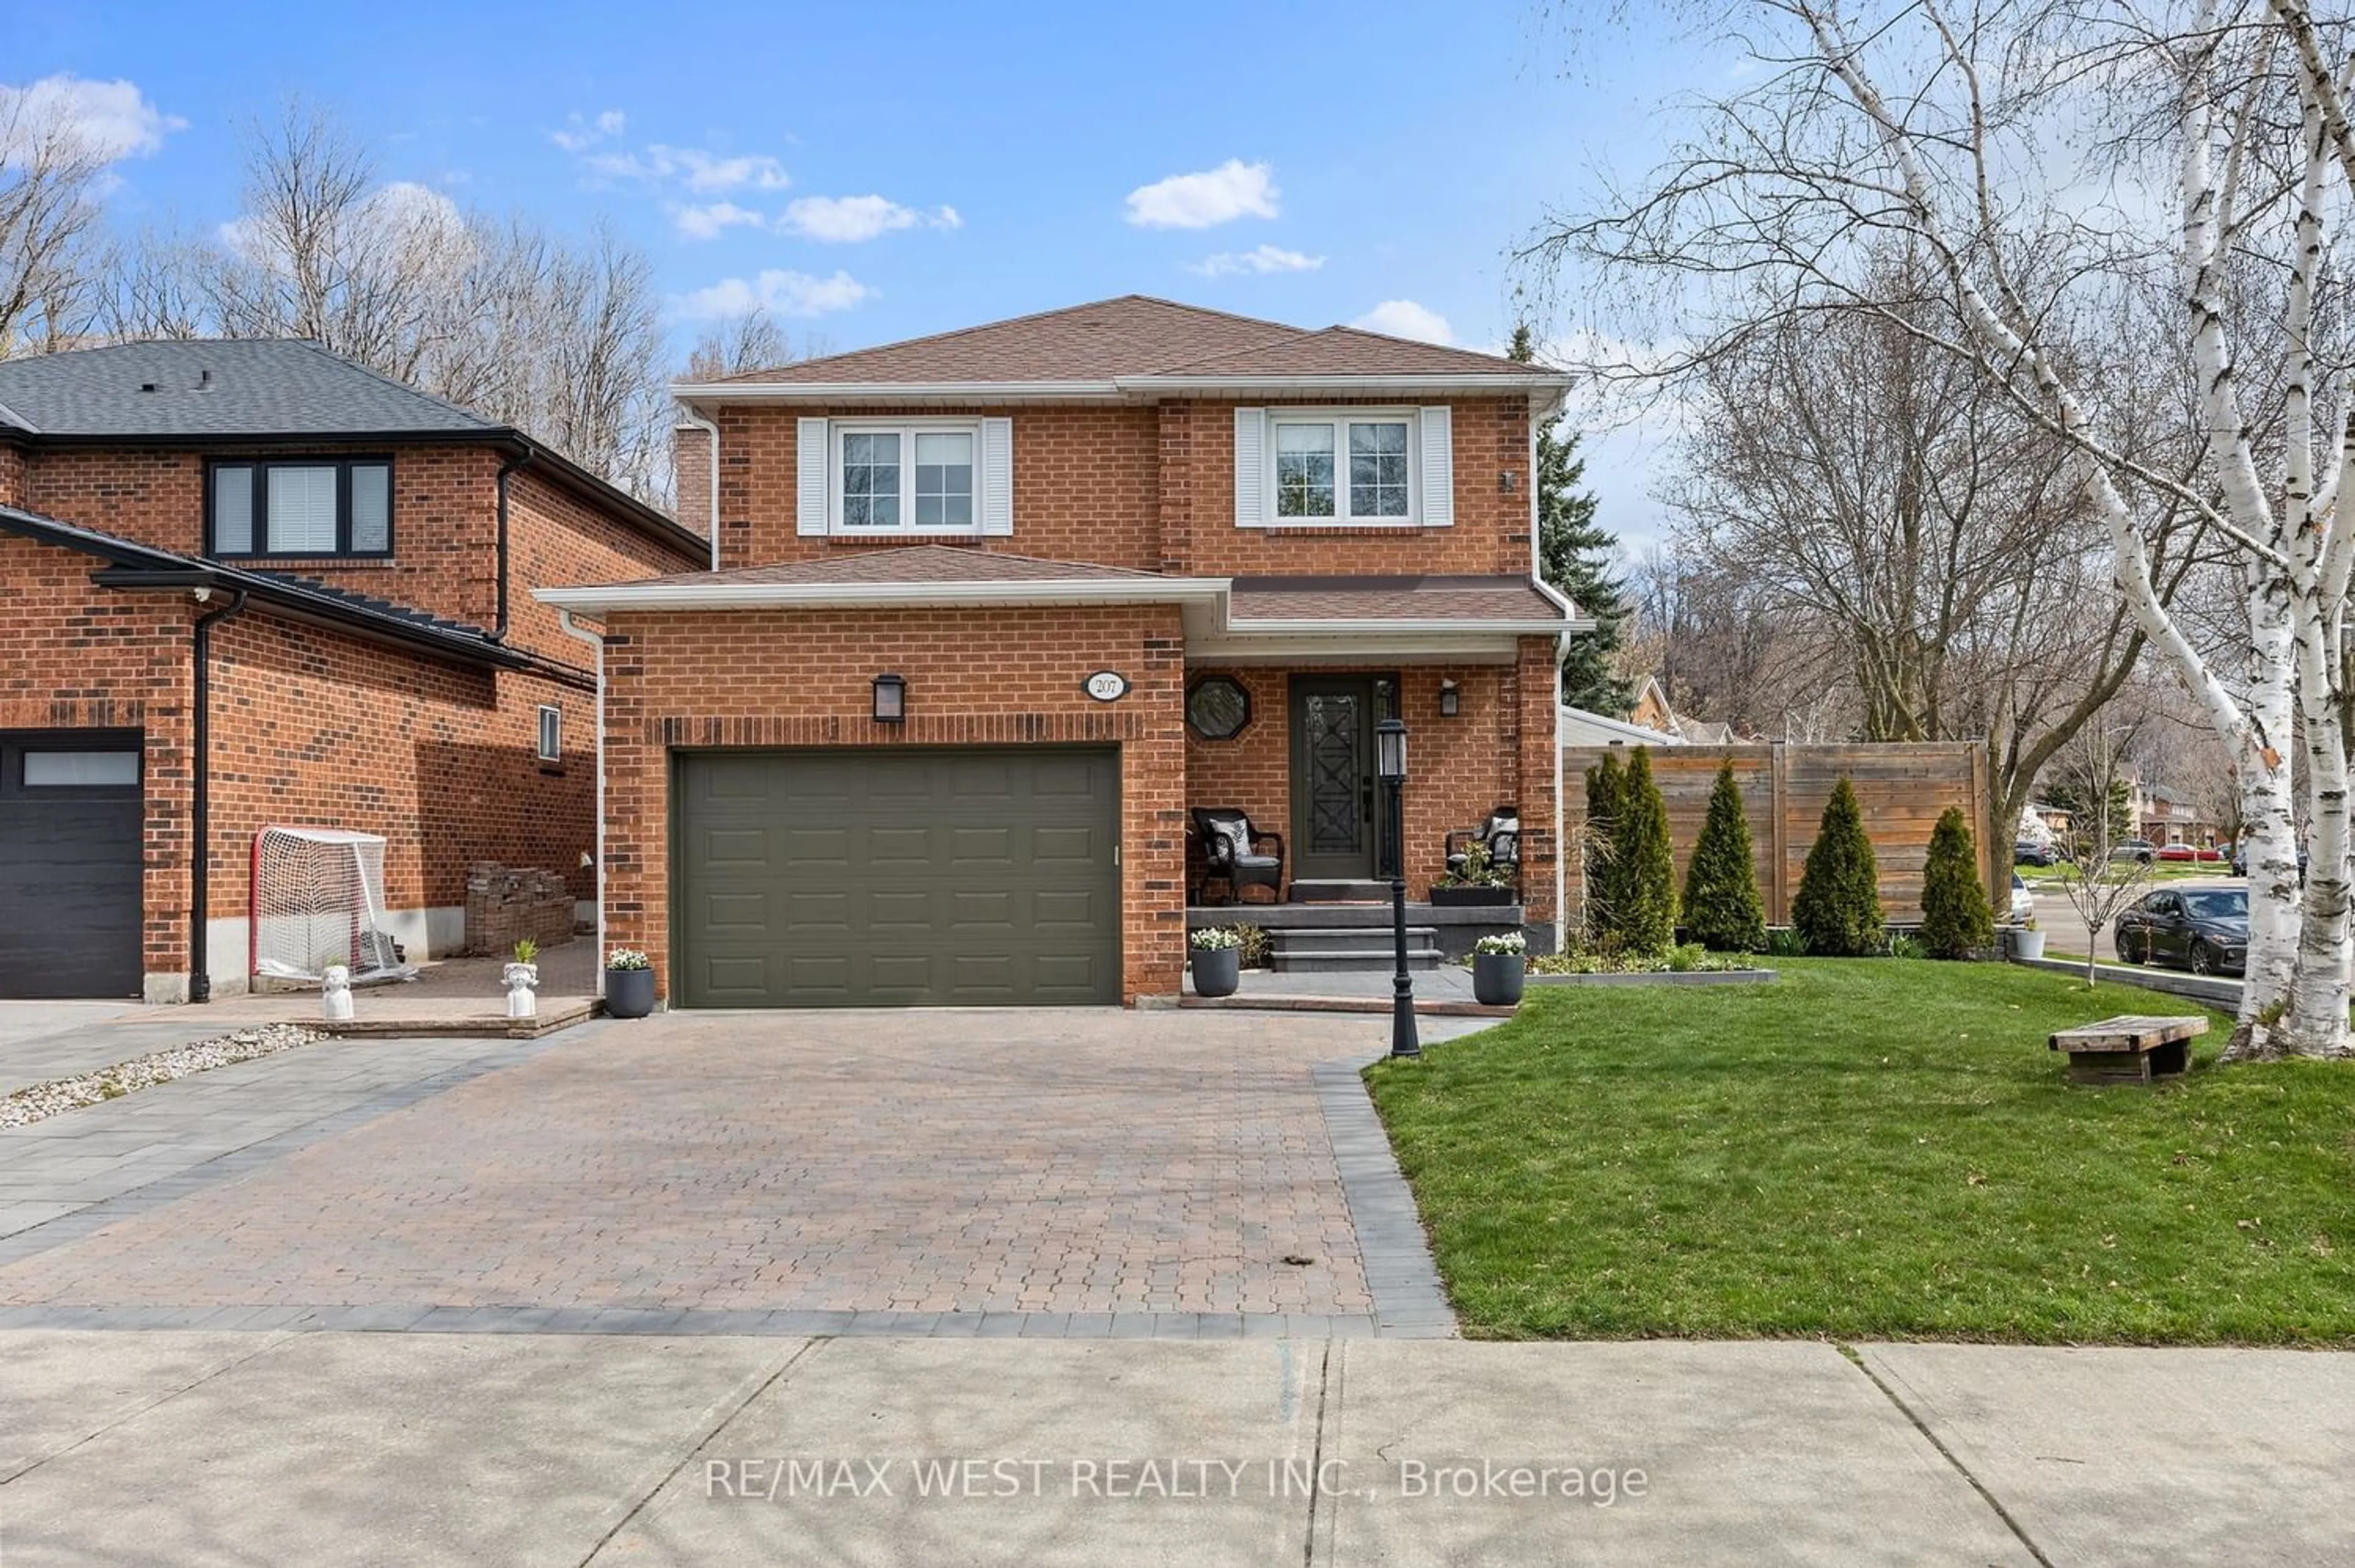 Home with brick exterior material for 207 Greenock Dr, Vaughan Ontario L6A 1V1